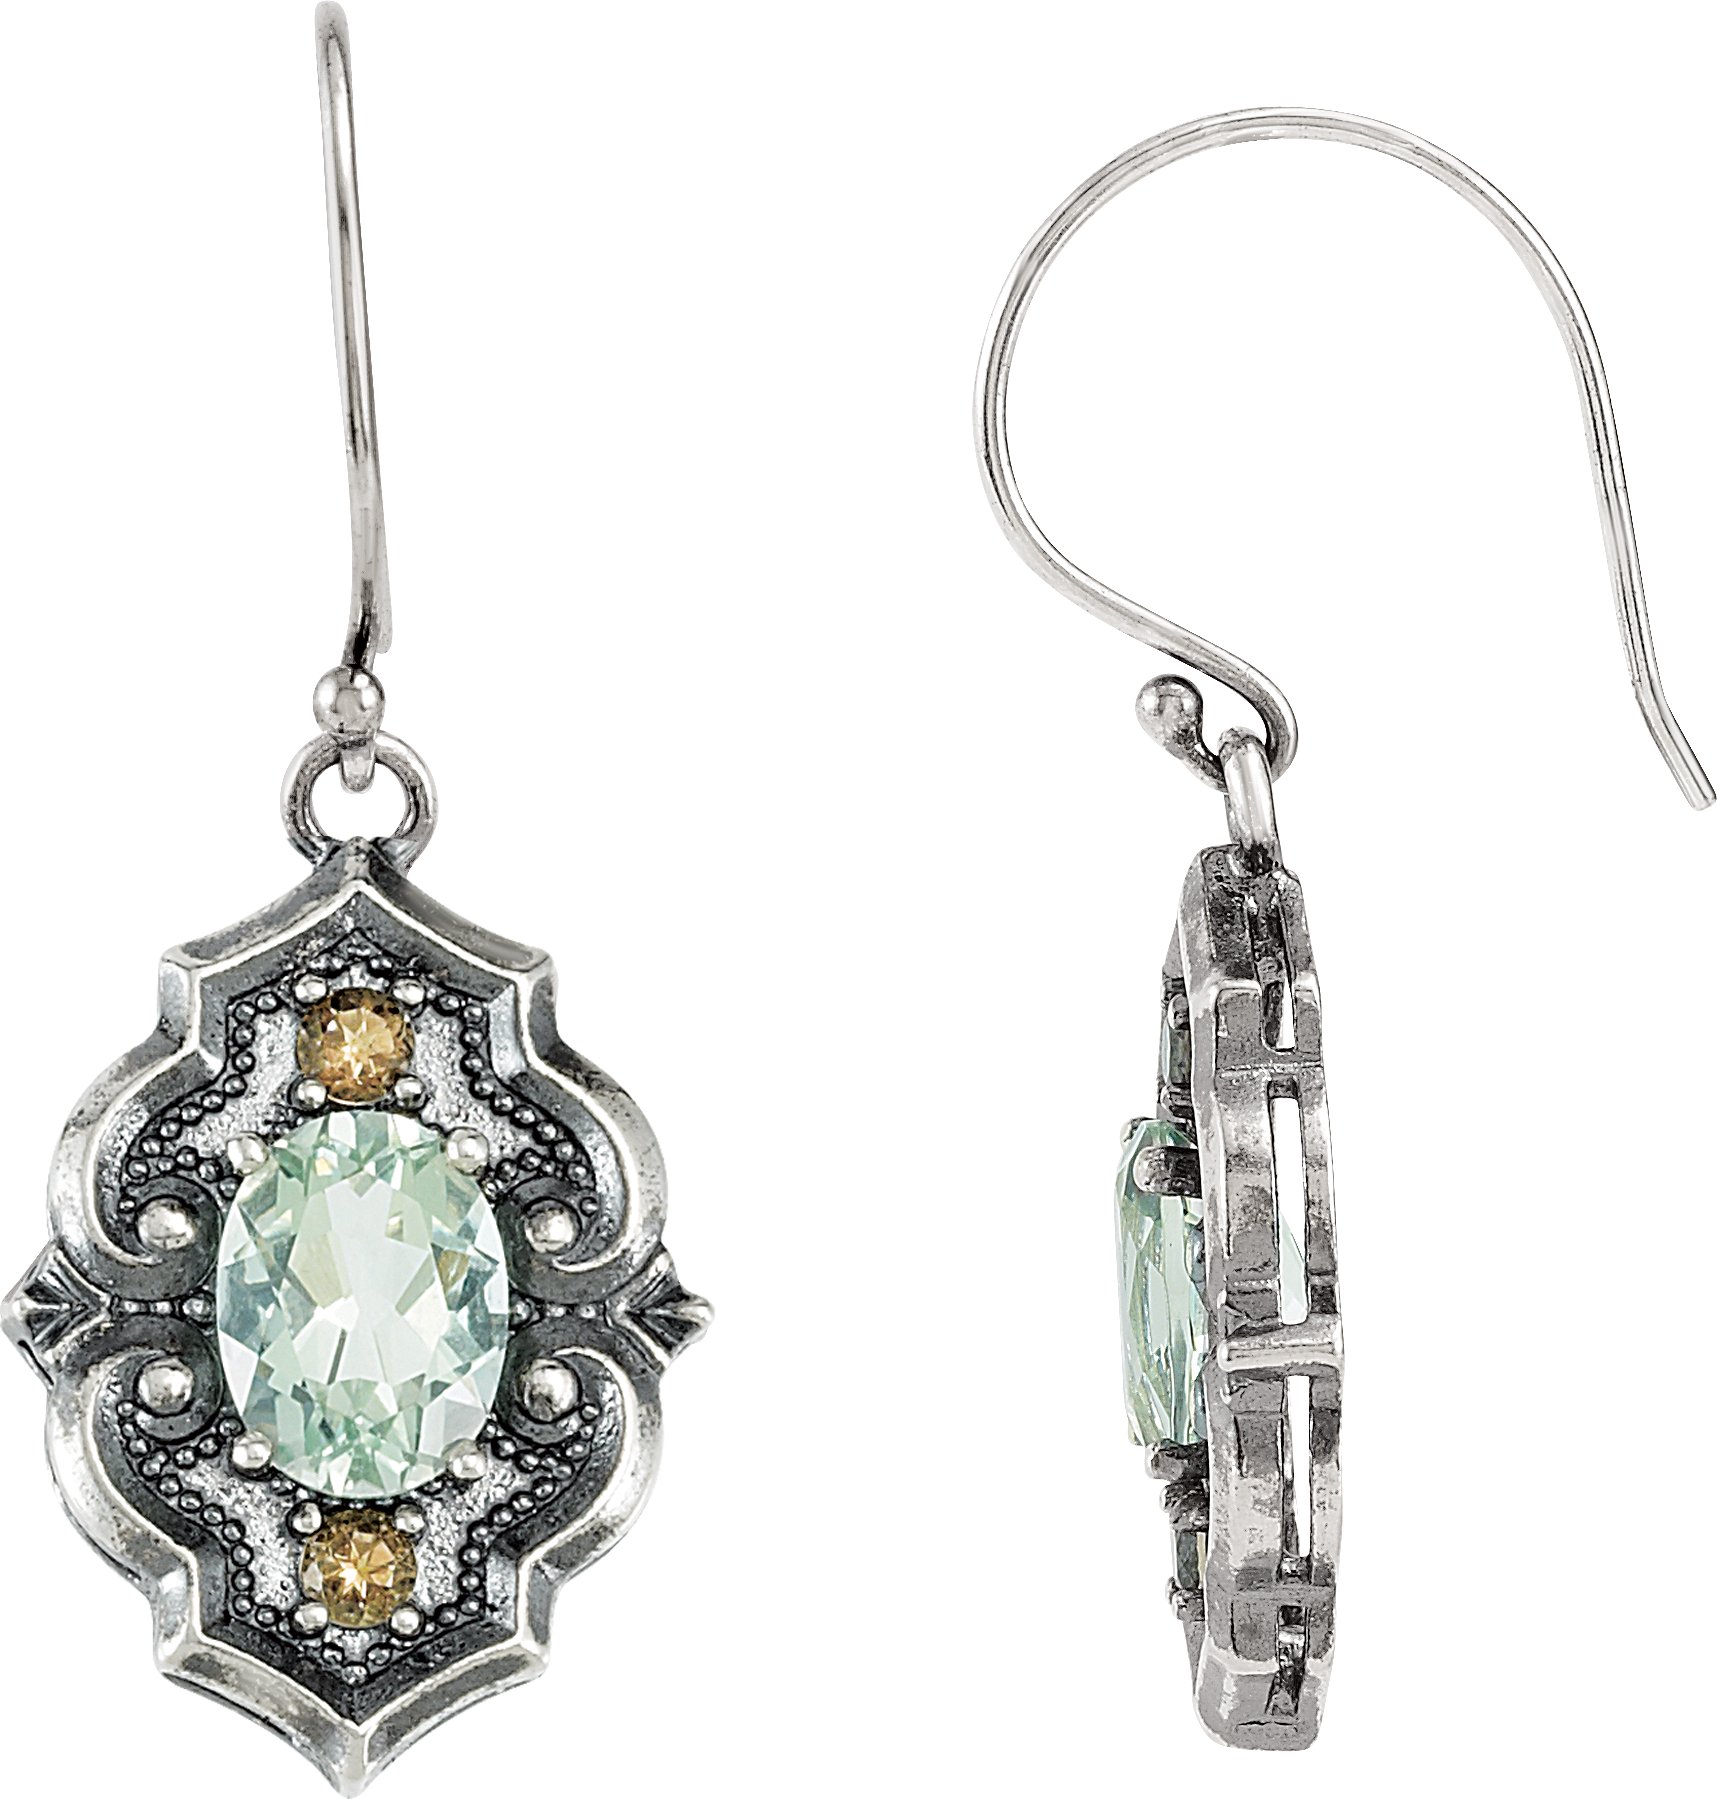 Quartz Victorian Style Earrings or Mounting